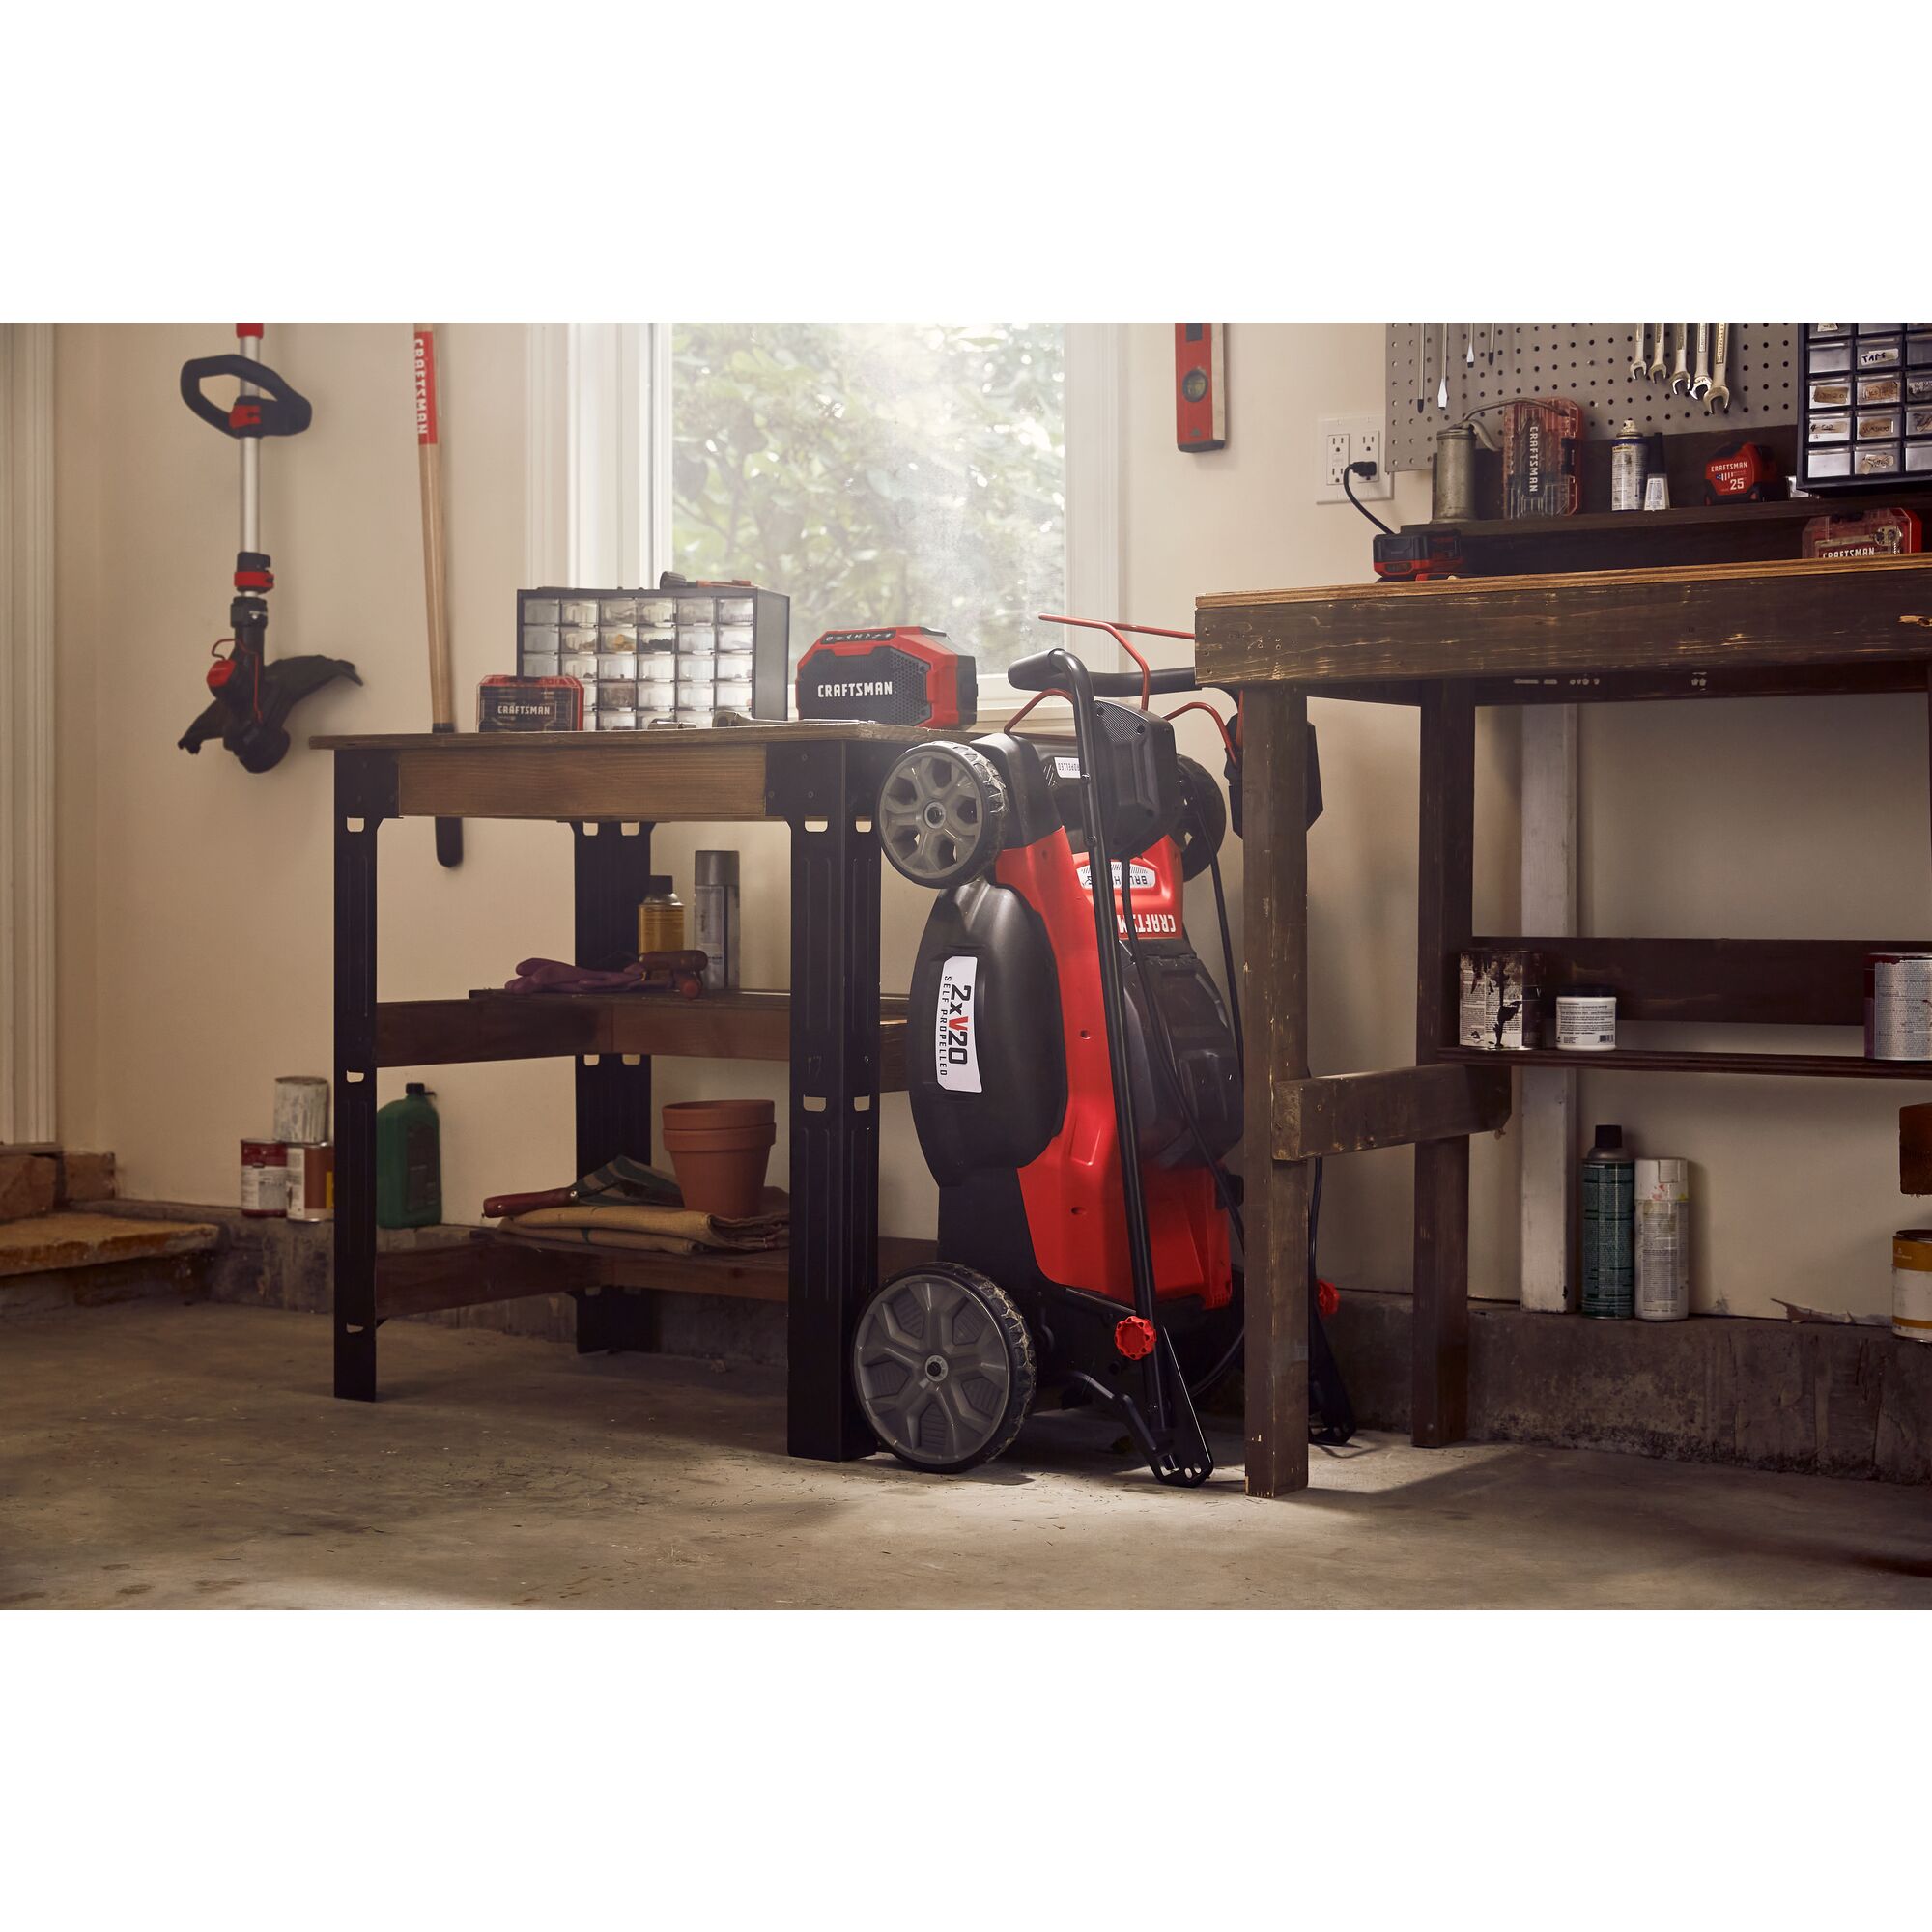 20 inch brushless cordless self propelled mower kit placed in storage room.